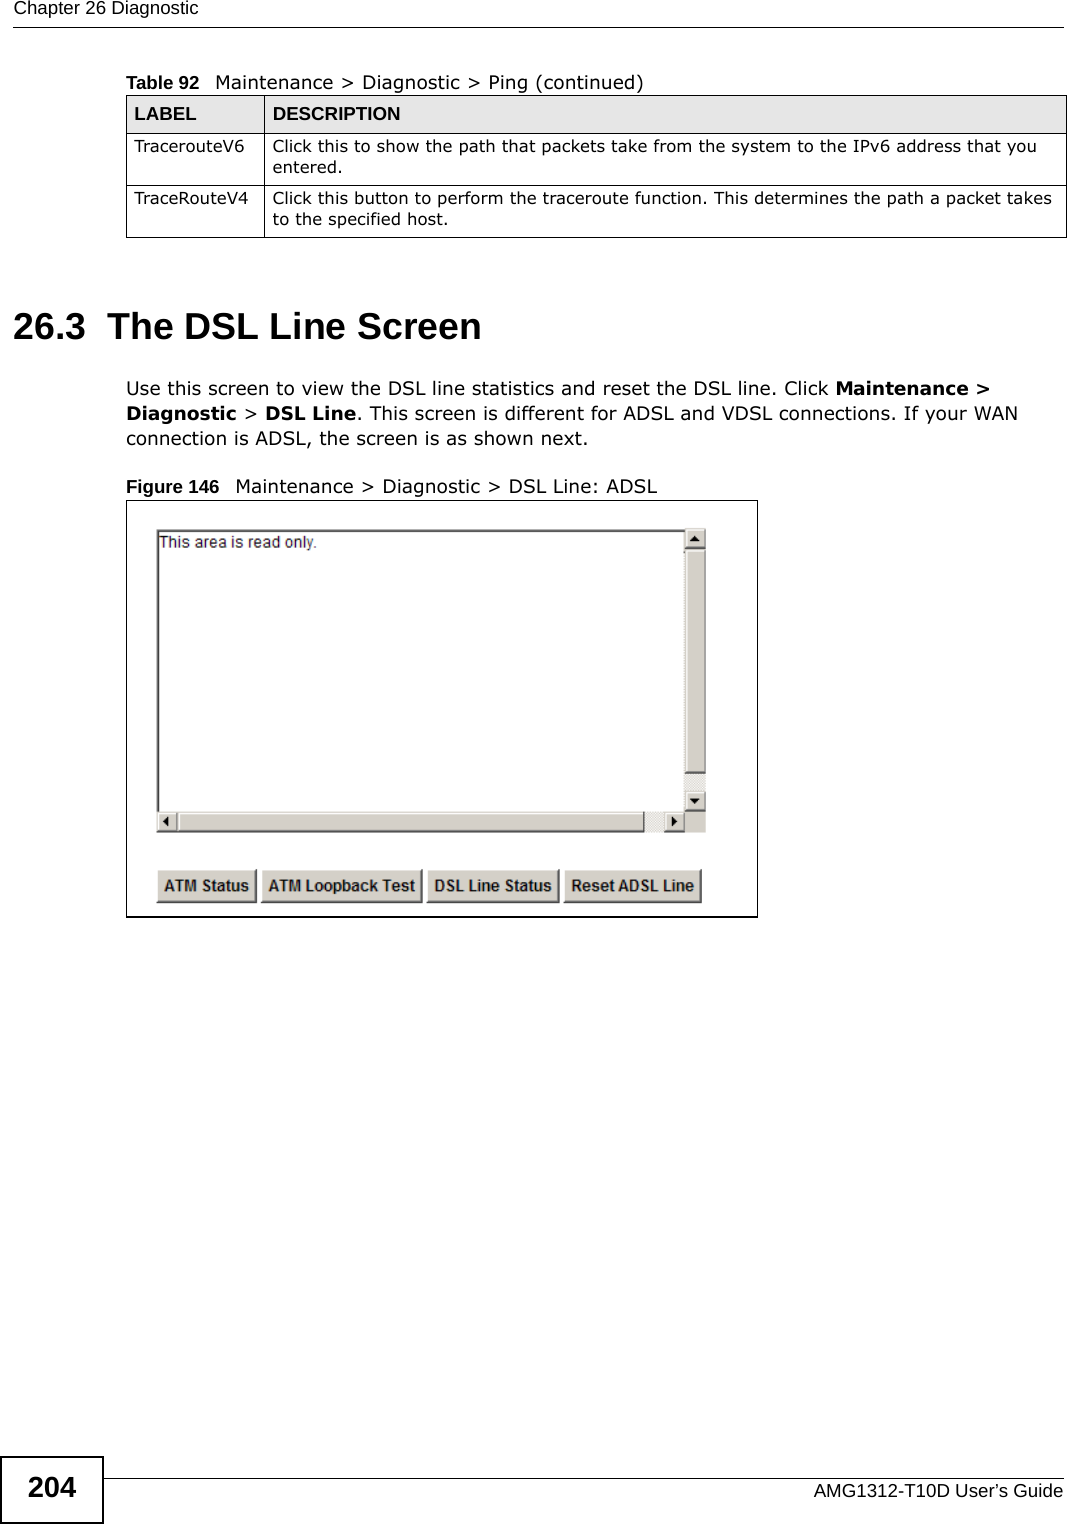 Chapter 26 DiagnosticAMG1312-T10D User’s Guide20426.3  The DSL Line Screen Use this screen to view the DSL line statistics and reset the DSL line. Click Maintenance &gt; Diagnostic &gt; DSL Line. This screen is different for ADSL and VDSL connections. If your WAN connection is ADSL, the screen is as shown next.Figure 146   Maintenance &gt; Diagnostic &gt; DSL Line: ADSLTracerouteV6 Click this to show the path that packets take from the system to the IPv6 address that you entered.TraceRouteV4 Click this button to perform the traceroute function. This determines the path a packet takes to the specified host.Table 92   Maintenance &gt; Diagnostic &gt; Ping (continued)LABEL DESCRIPTION